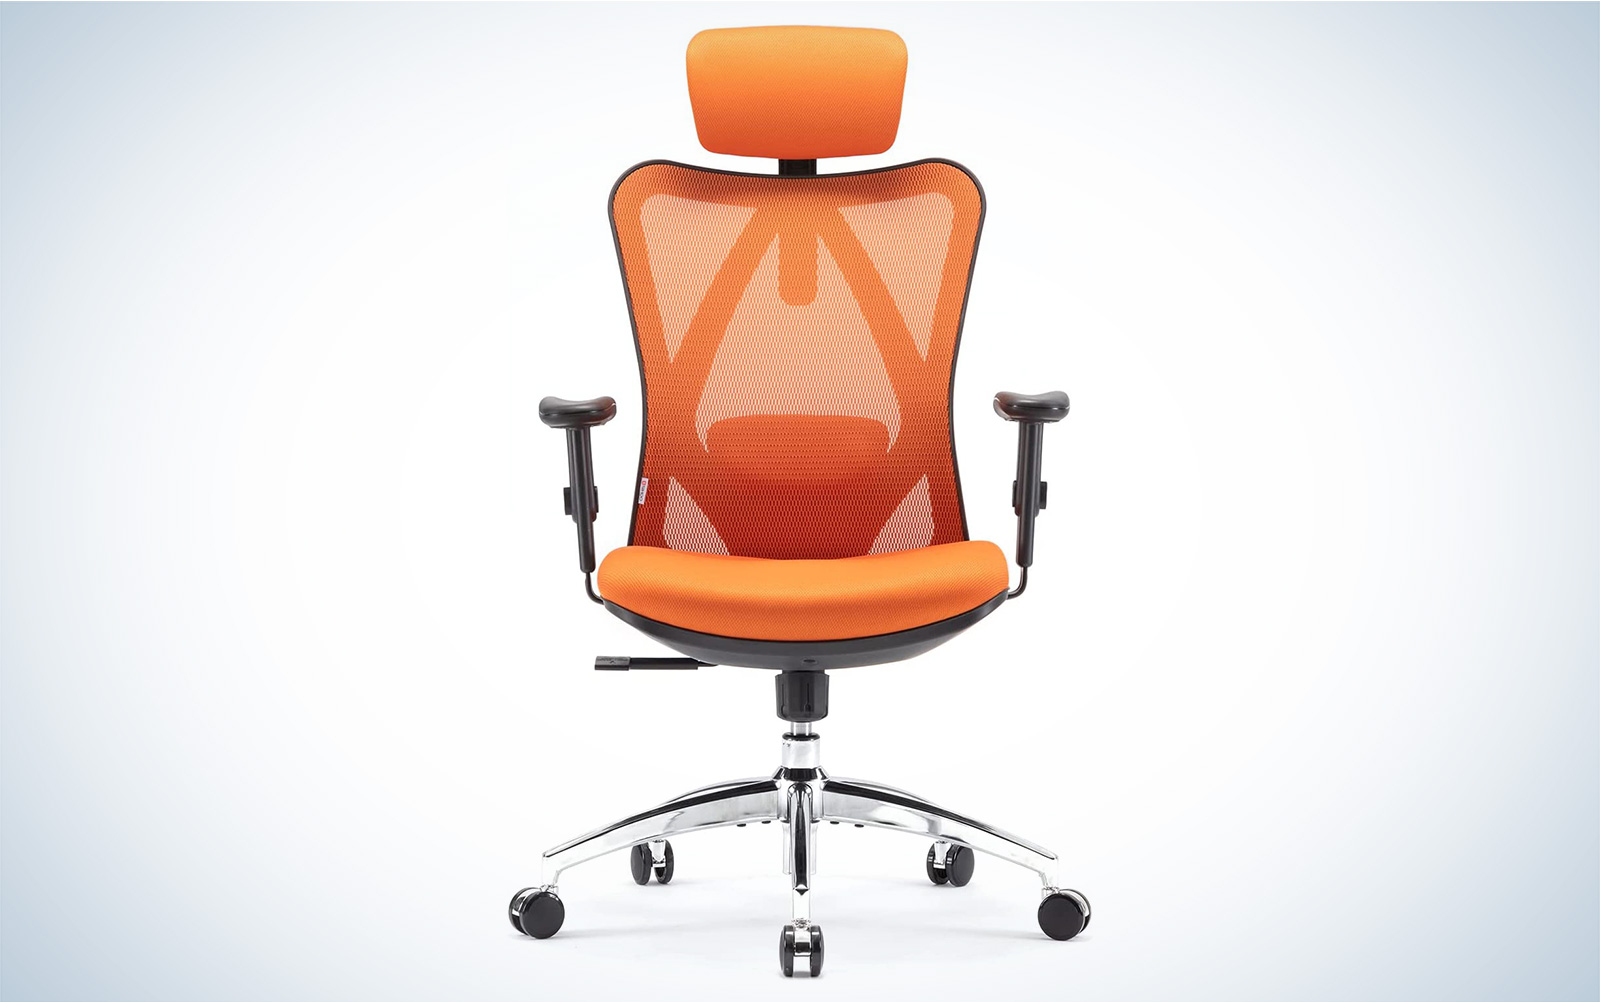 The sihoo office chair for lumbar support in orange